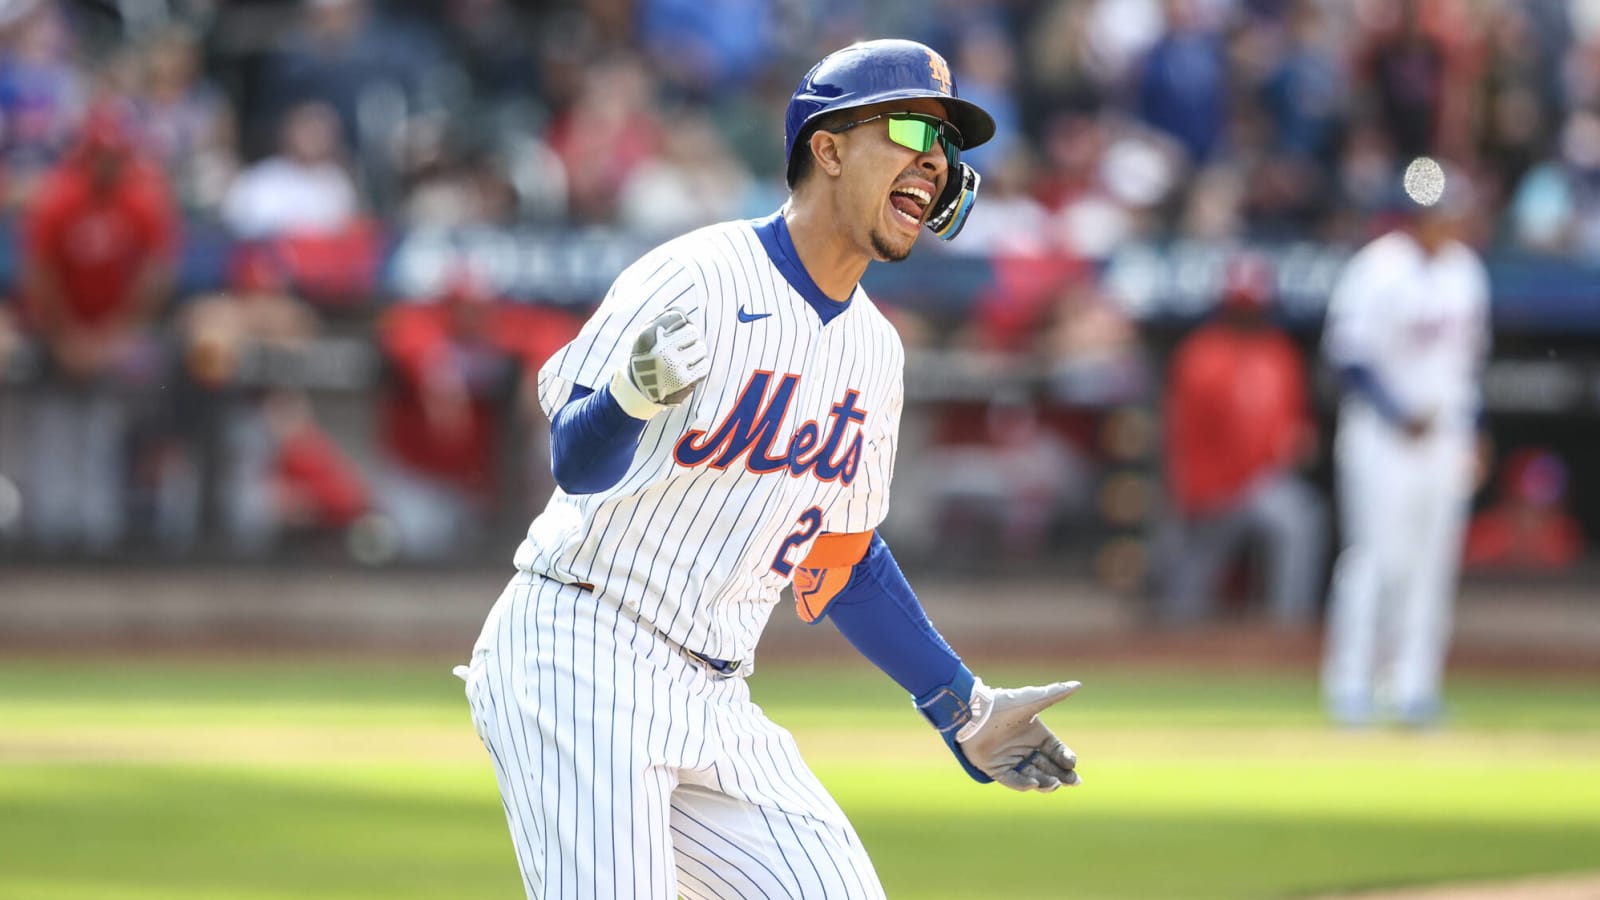 Mets Will Play Short Up the Middle to Add Mark Vientos’ Bat